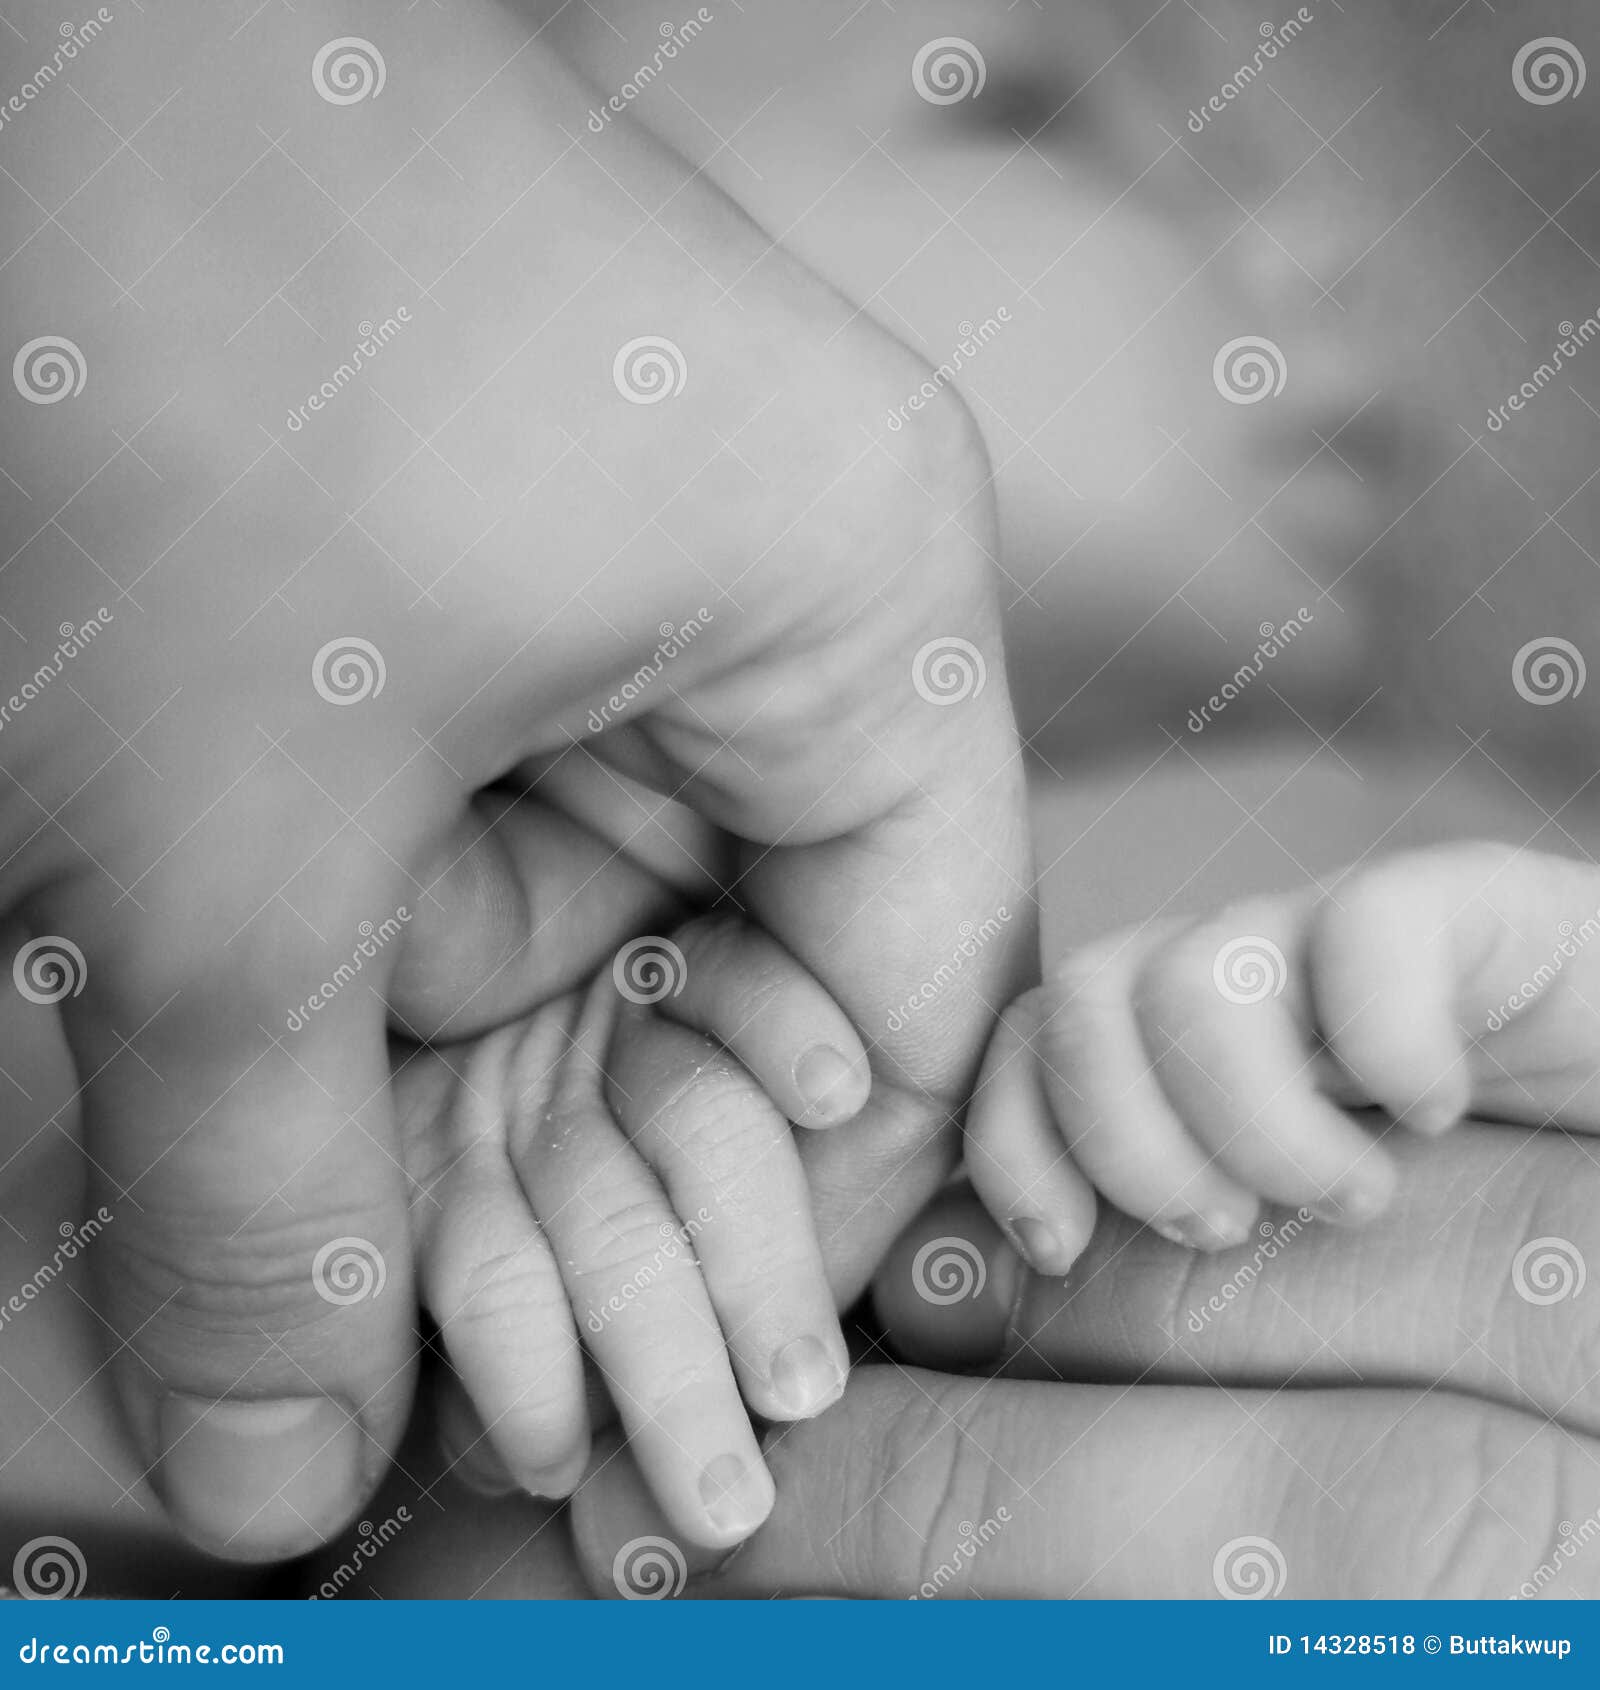 List 92+ Images mom and dad and baby holding hands Latest